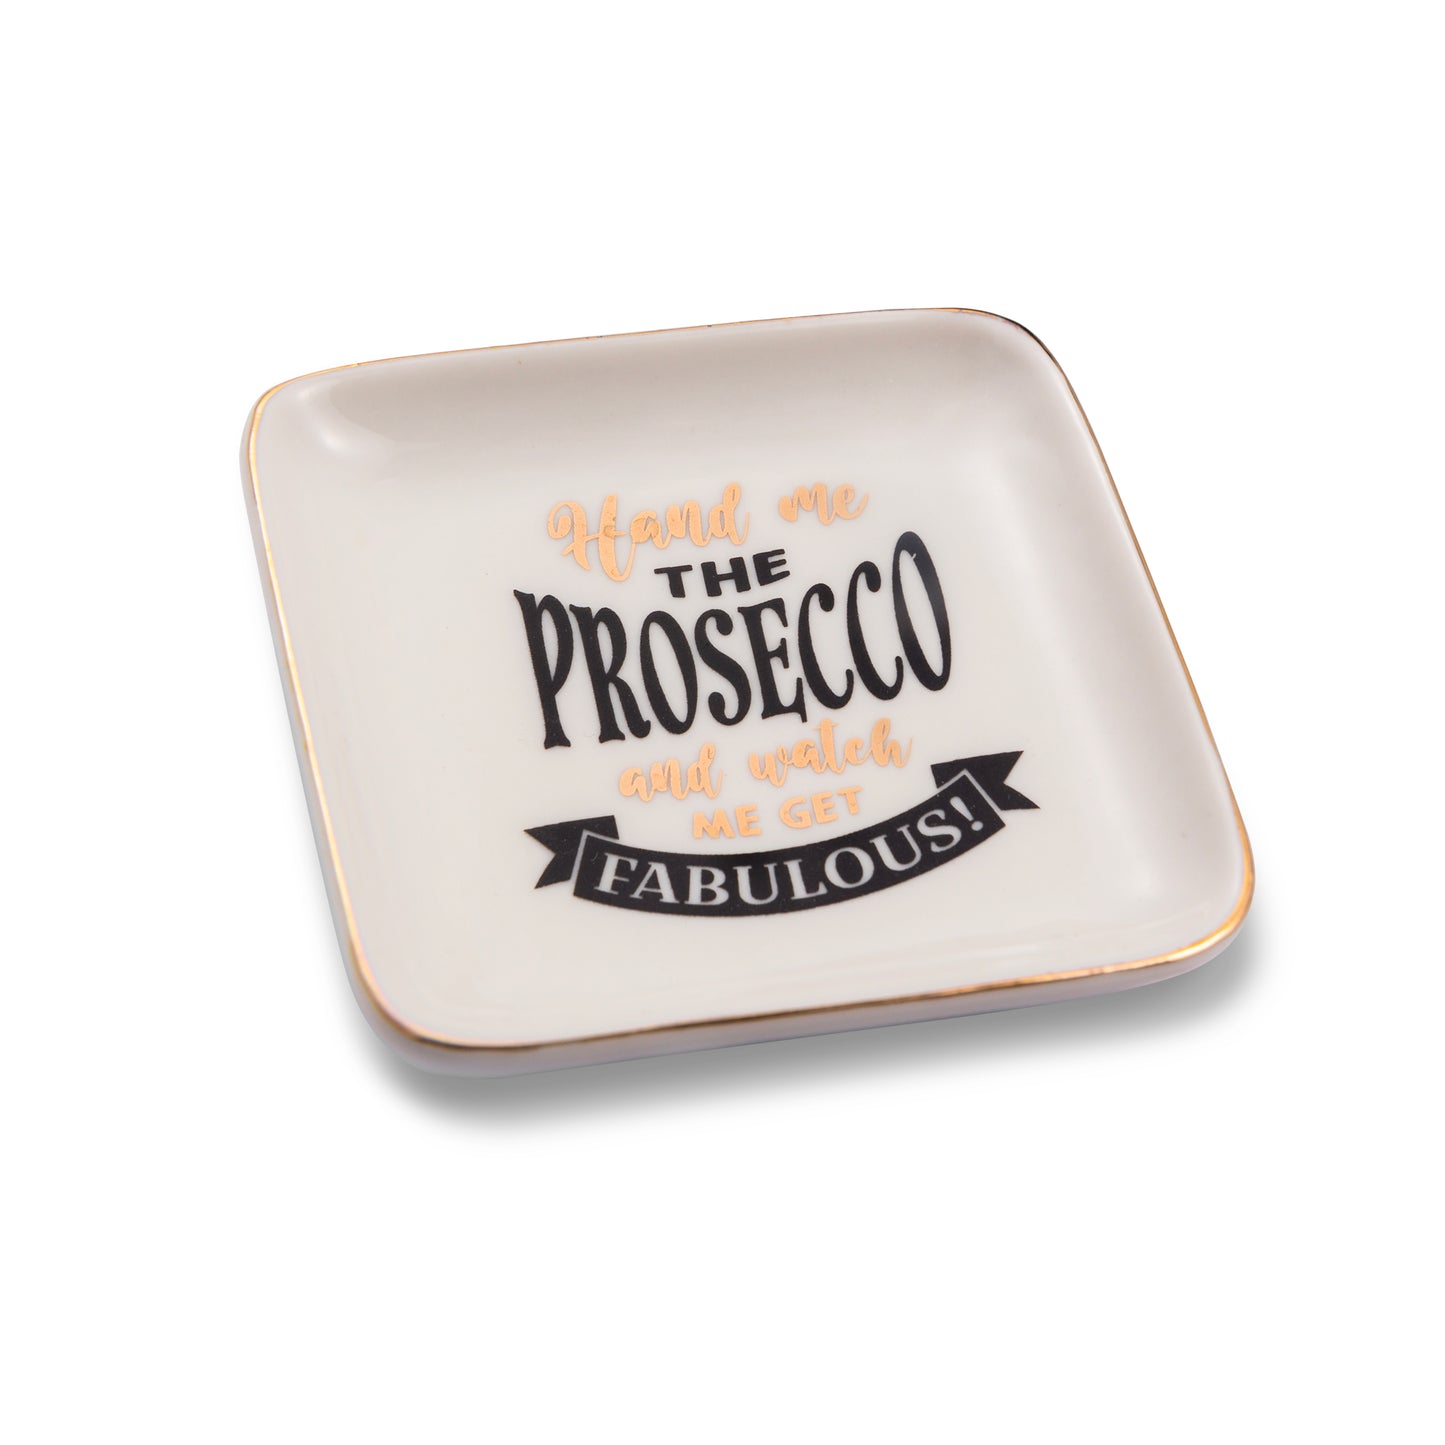 Hand The Prosecco & Watch Me Fabulous Ceramic Trinket Tray